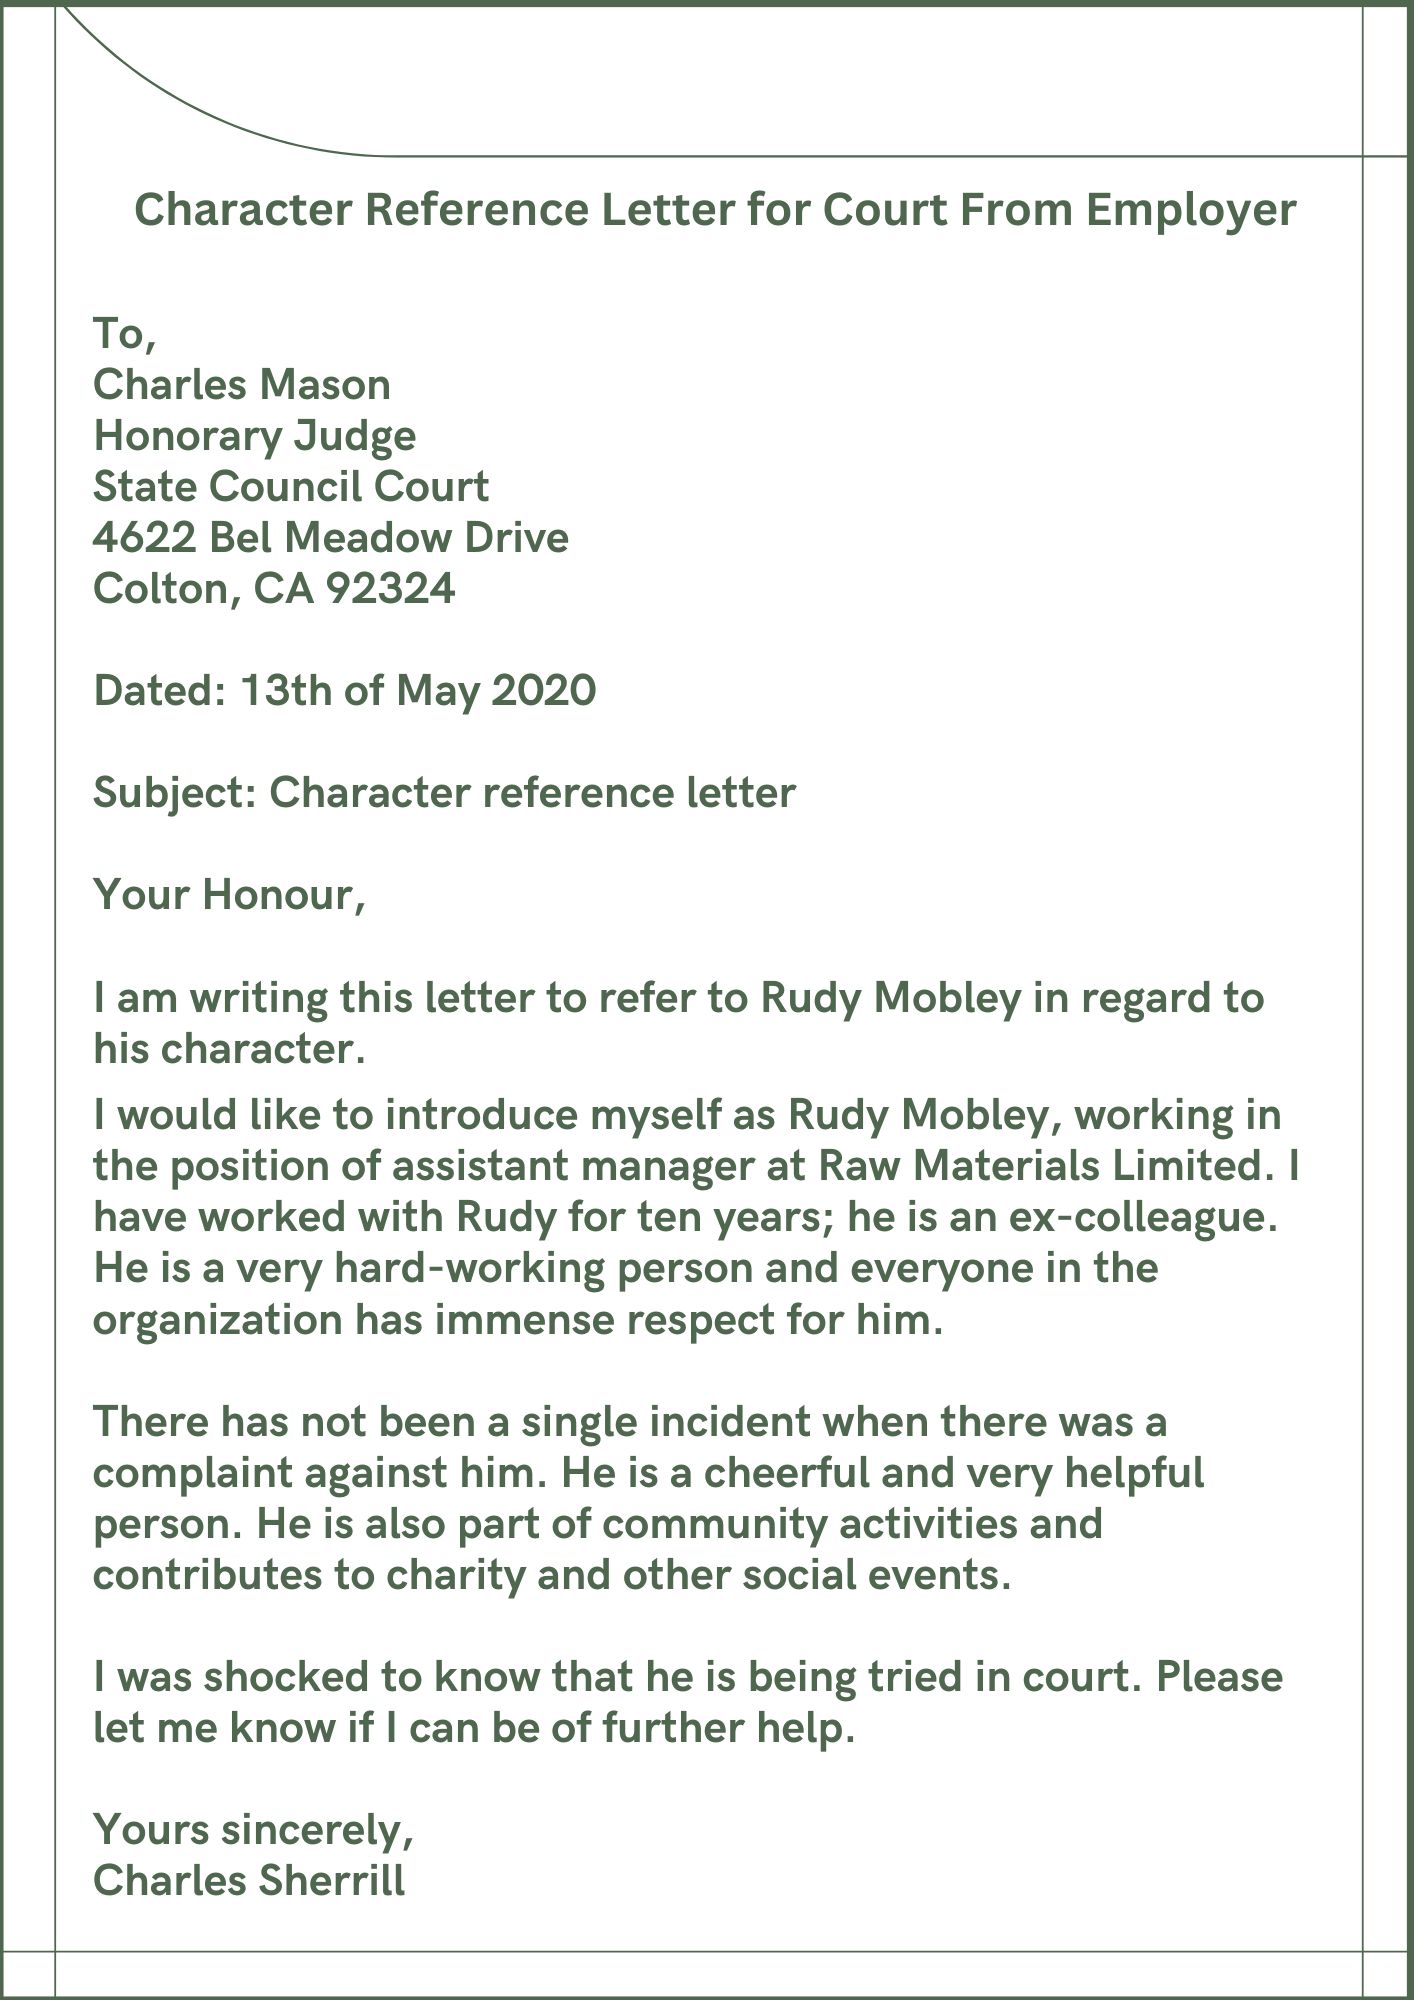 Character Reference Letter for Court From Employer